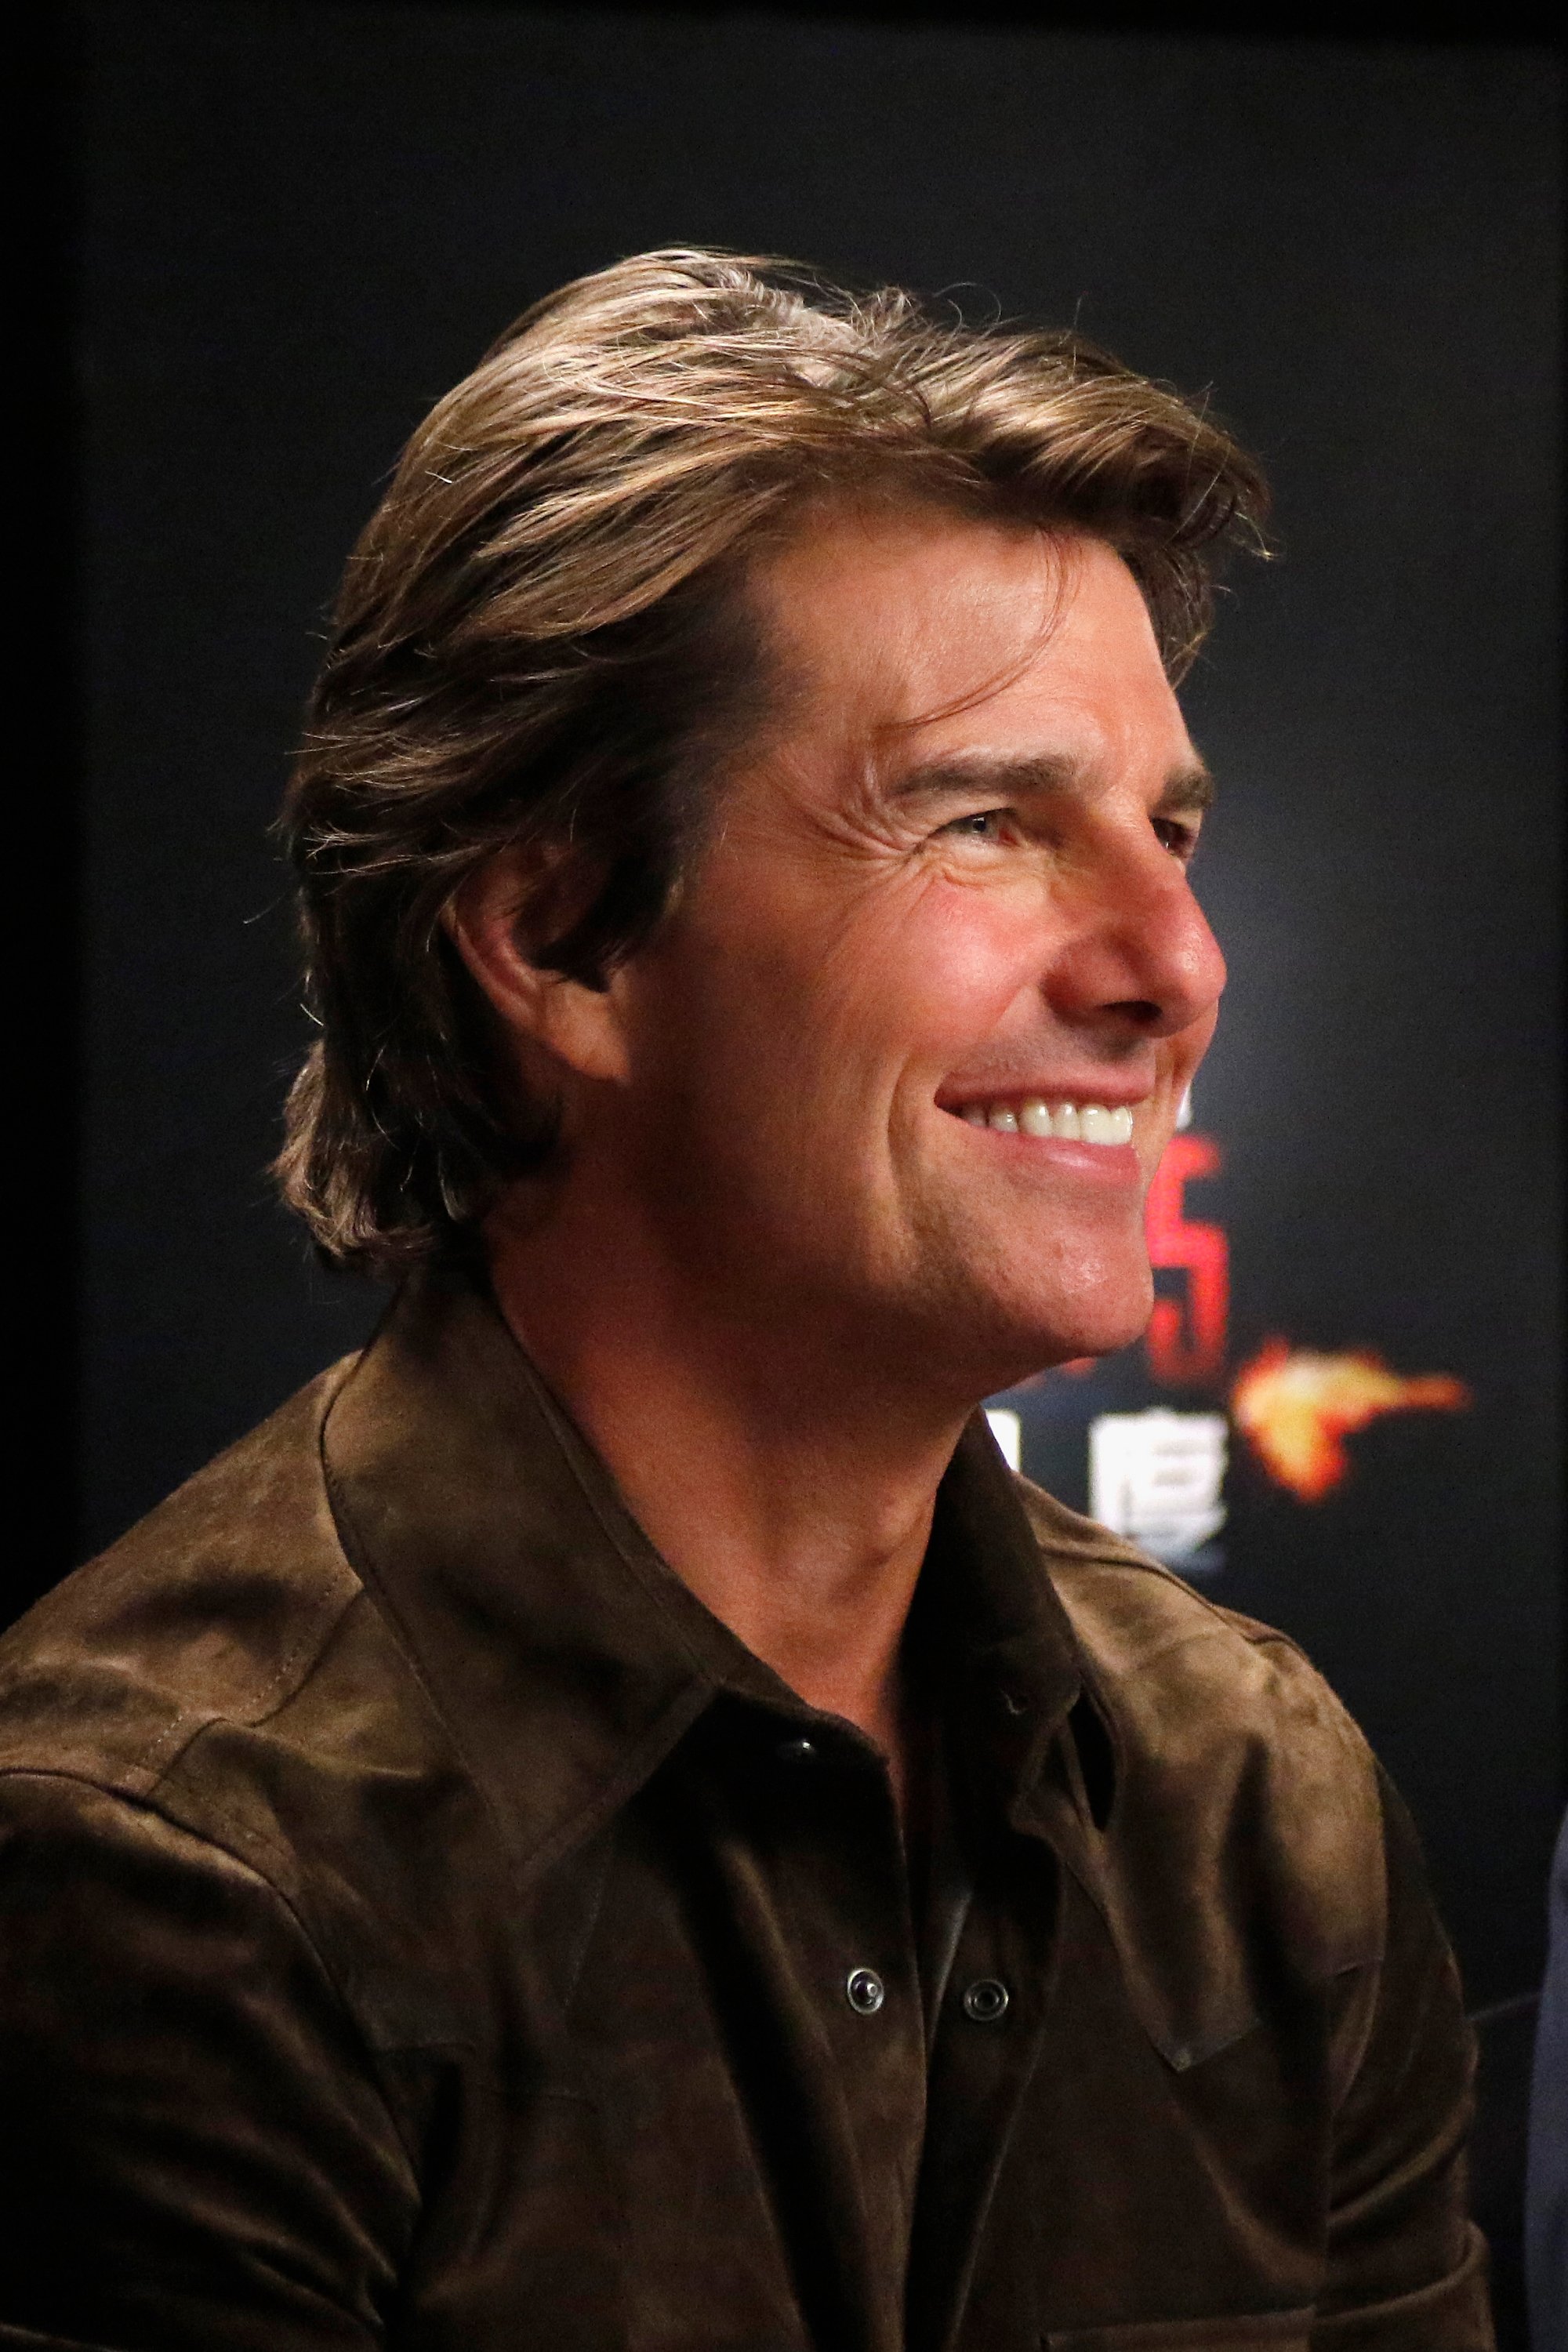 mission-impossible-rogue-nation-shanghai-airport-arrival-sept5-2015-009.jpg